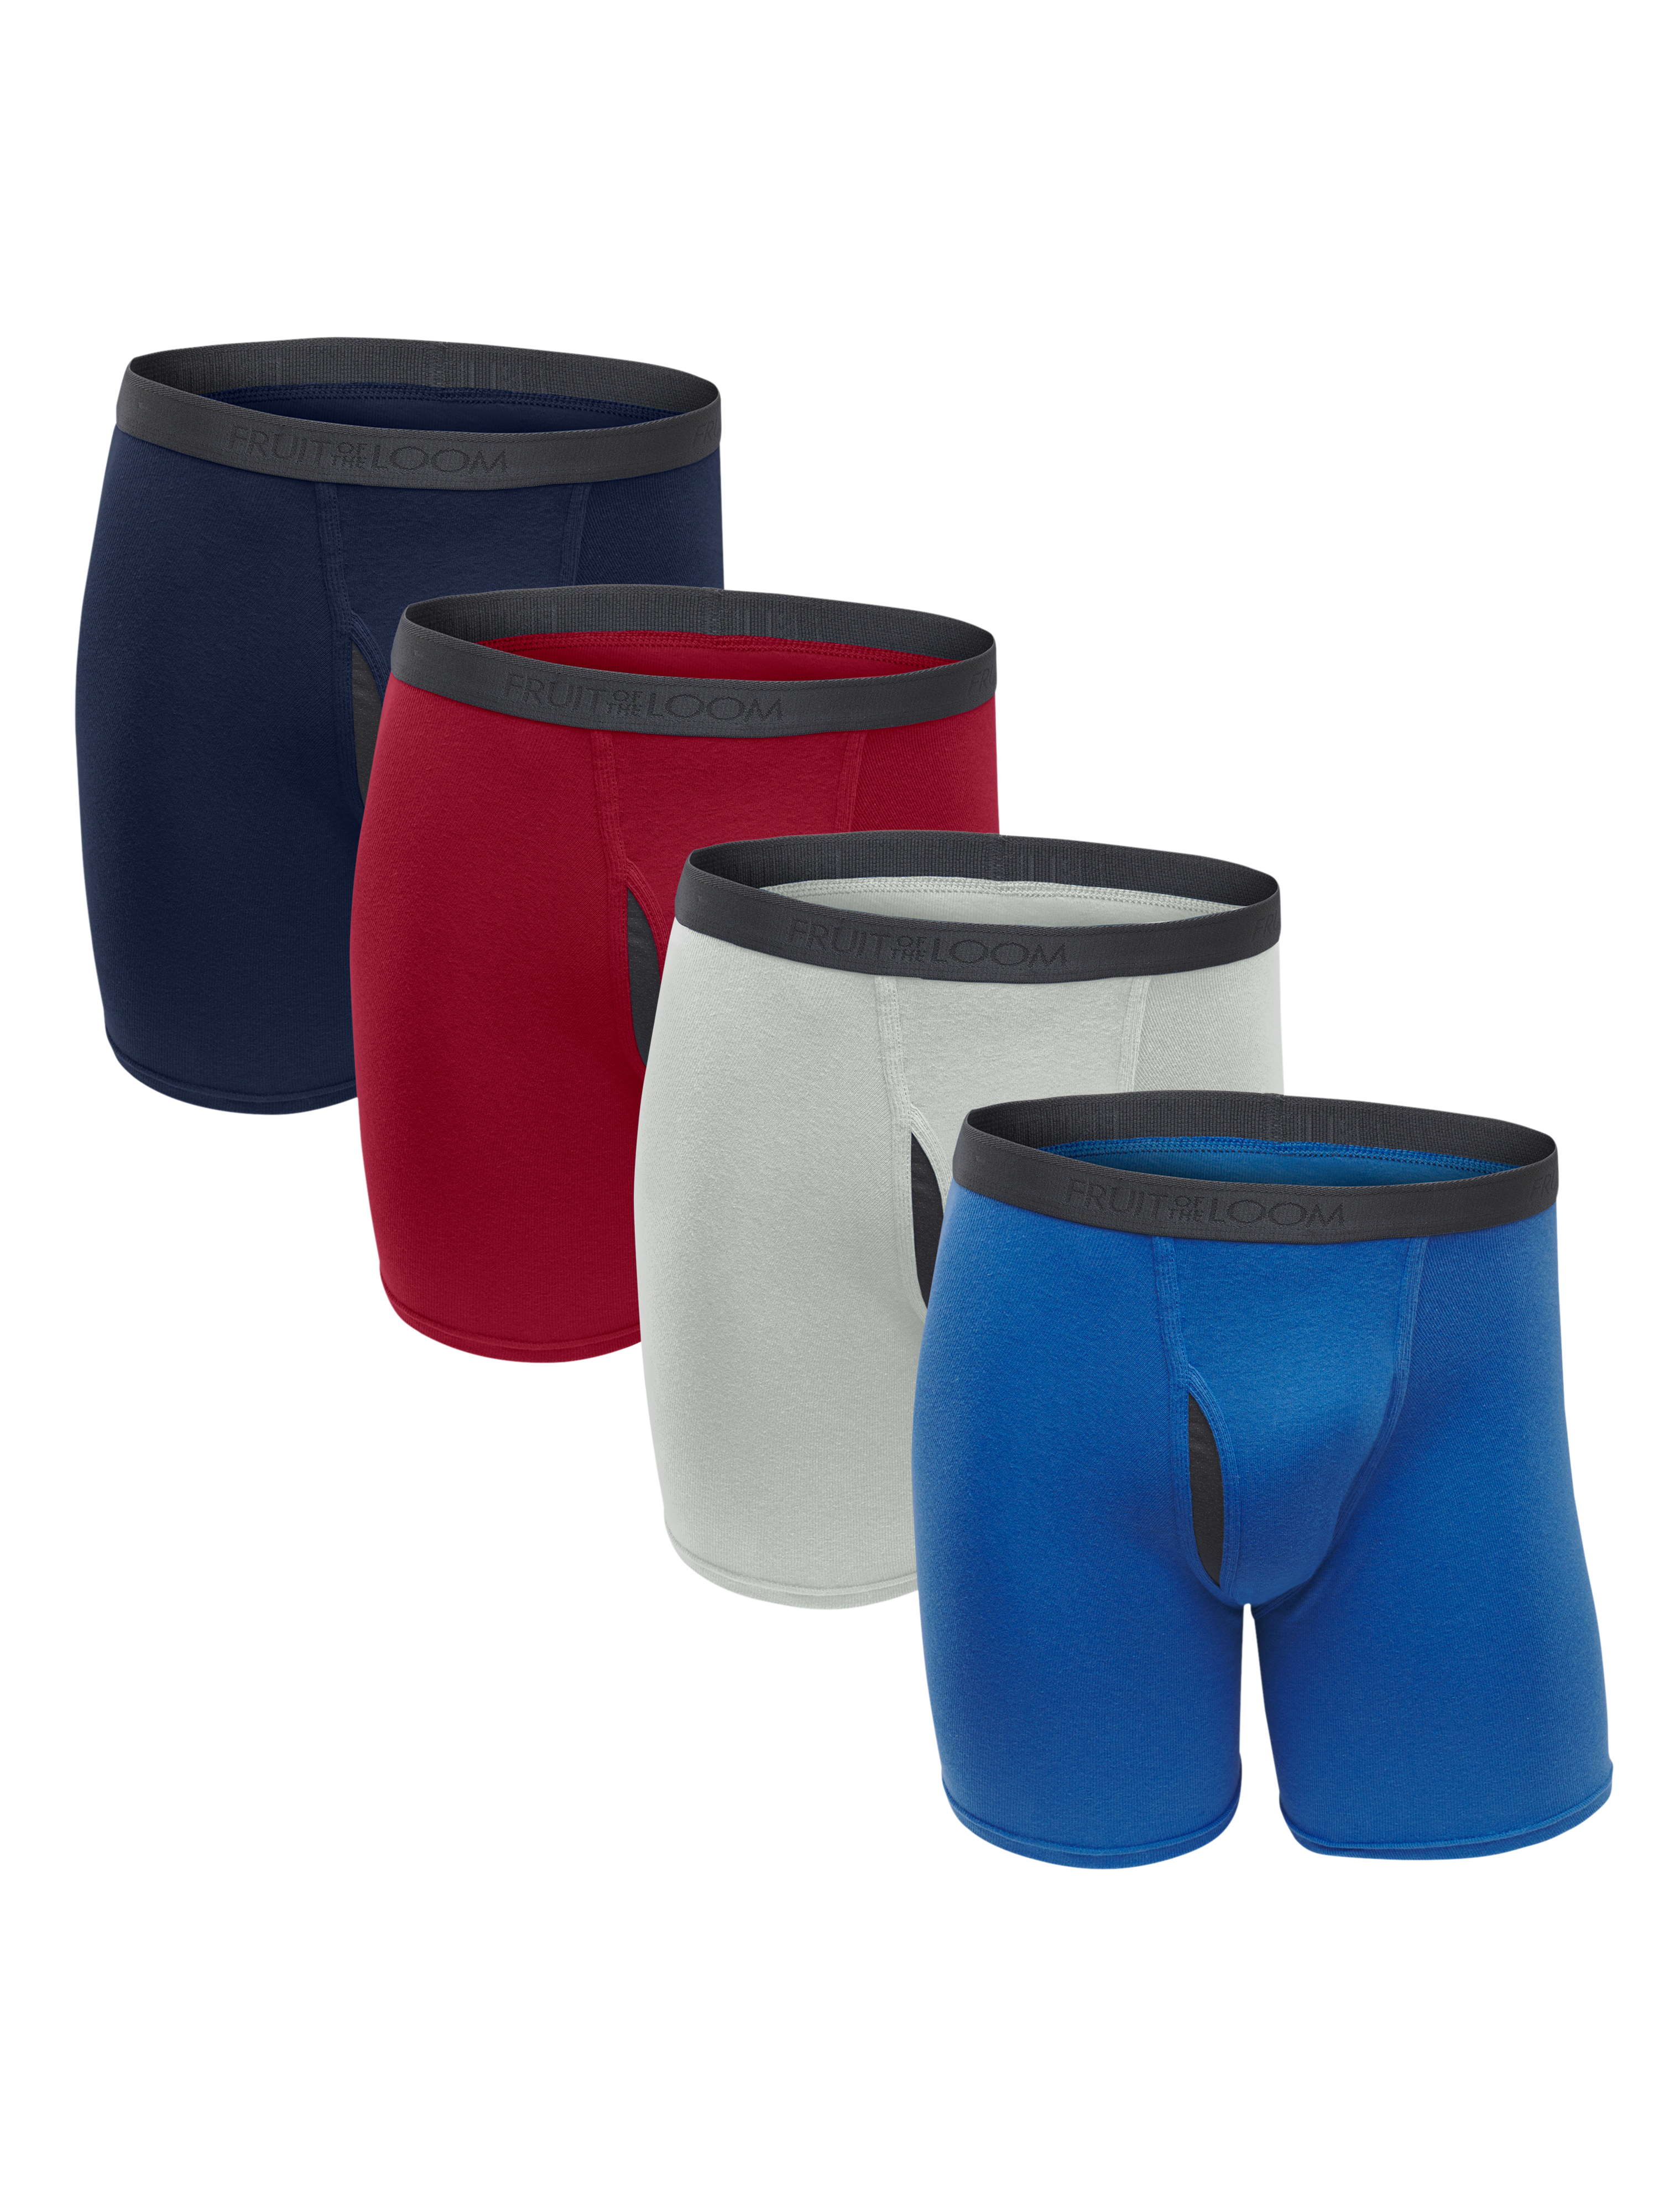 Fruit of the Loom Men's Premium CoolZone® Boxer Briefs, Assorted 4 Pack